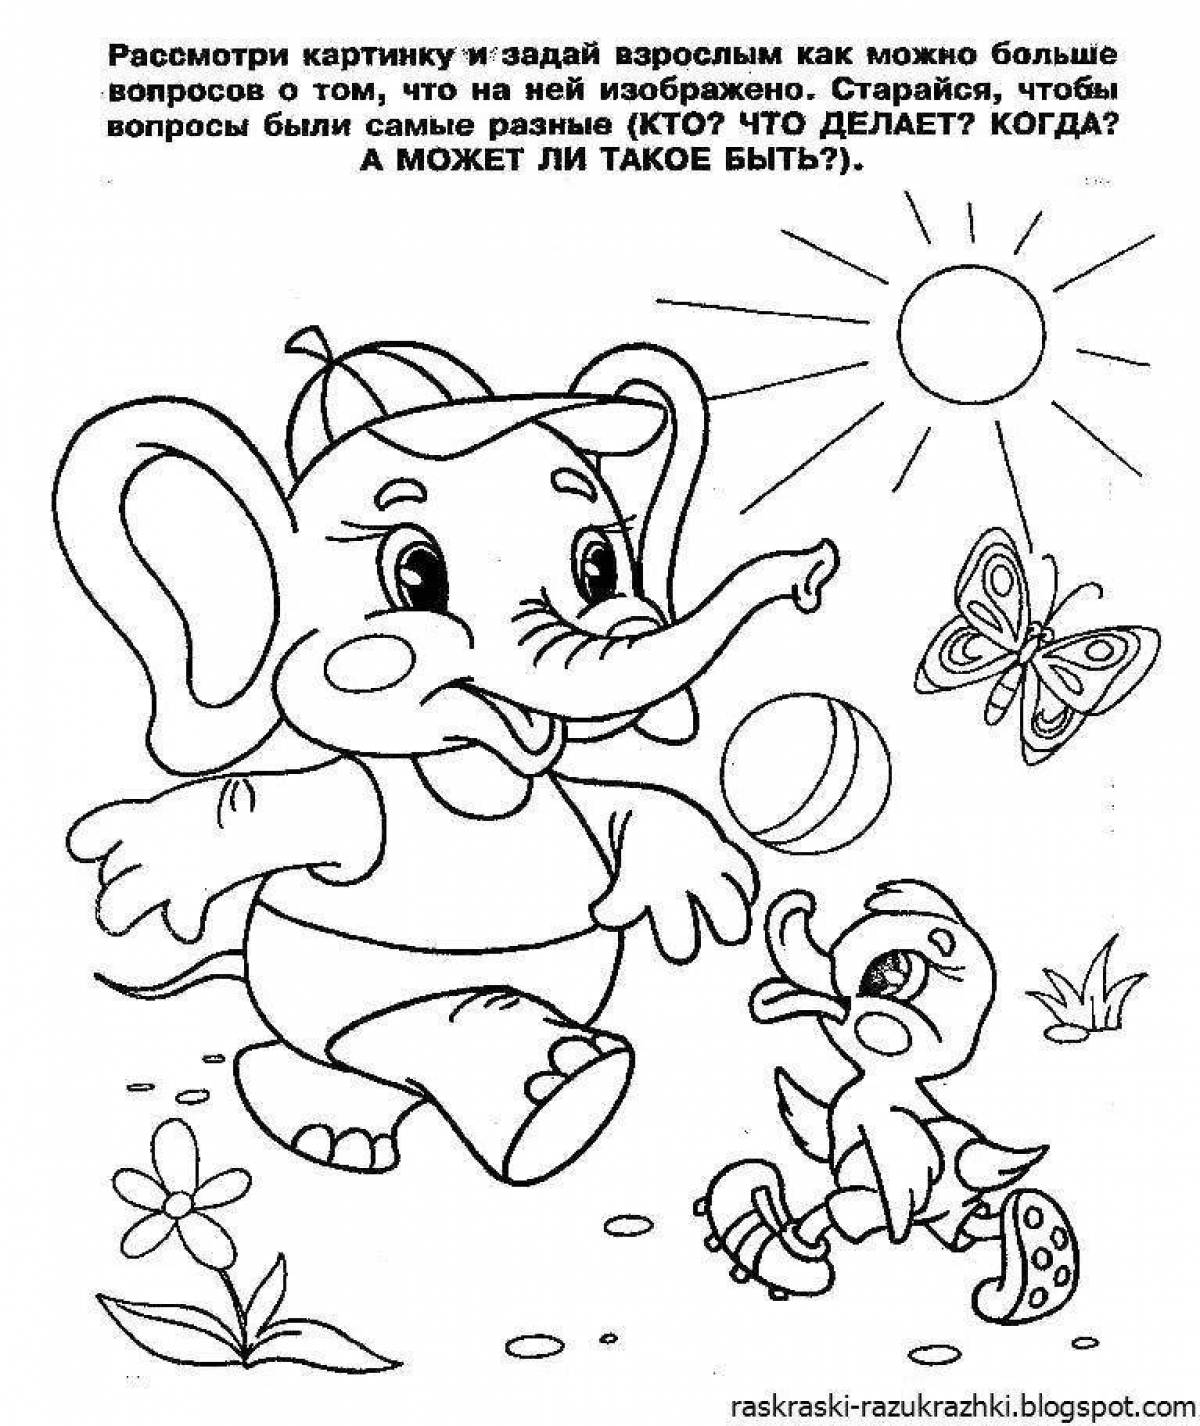 Colourful coloring book for children 5 years old